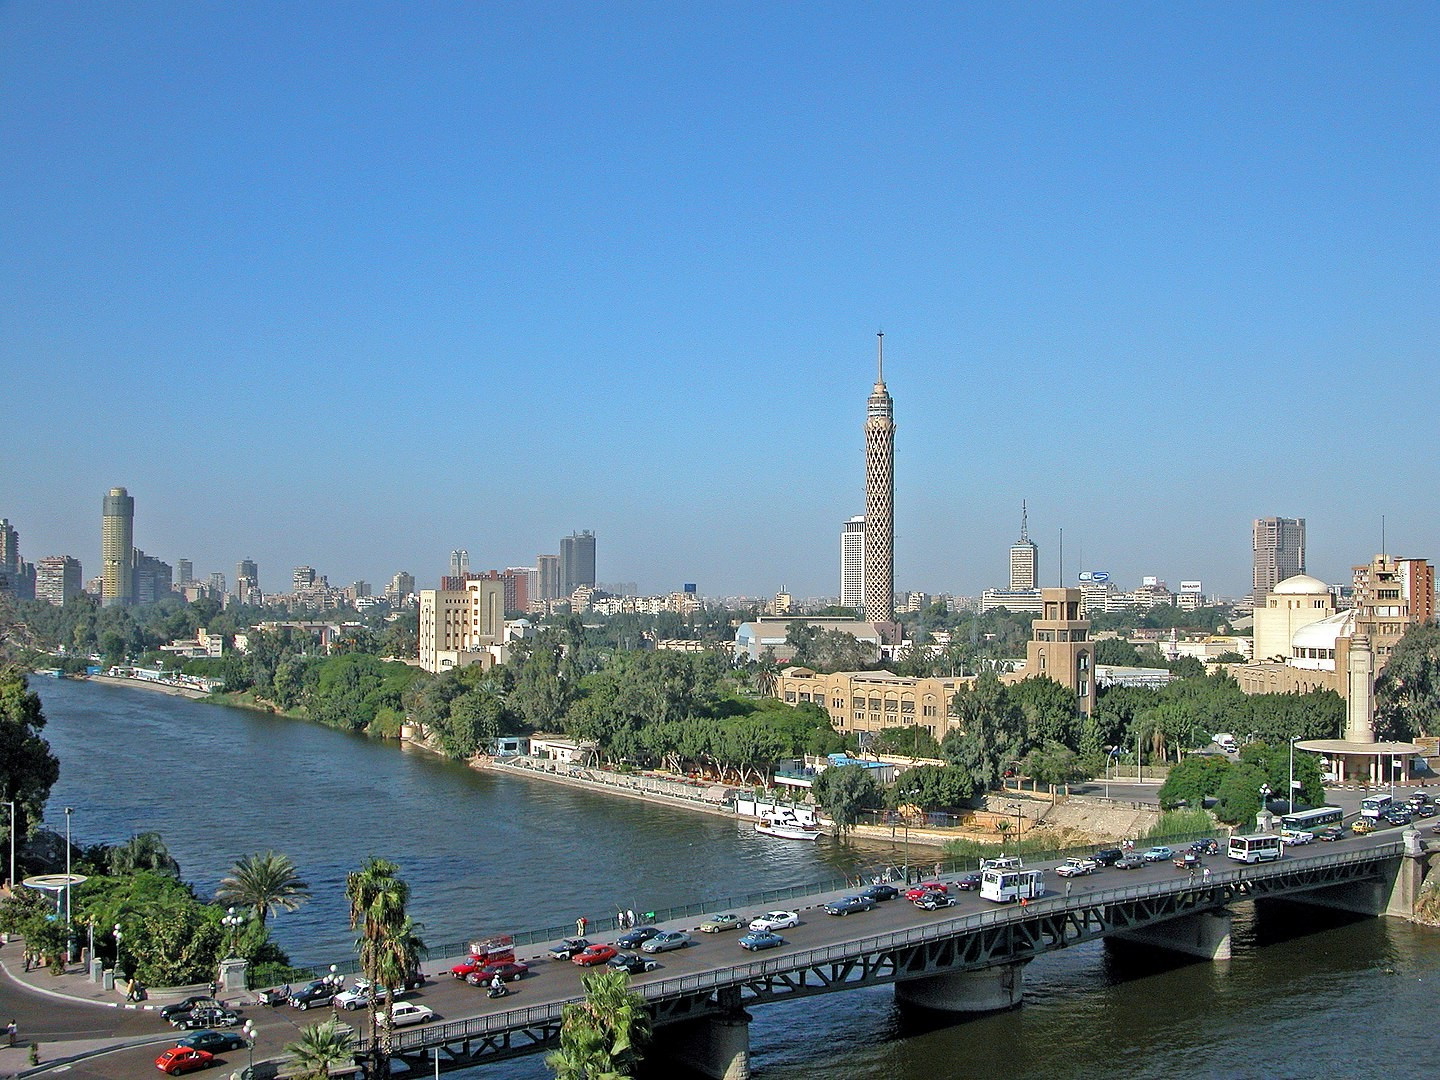 By Dennis Jarvis from Halifax, Canada - Egypt-2A-010 - Cairo, CC BY-SA 2.0, https://commons.wikimedia.org/w/index.php?curid=33050031